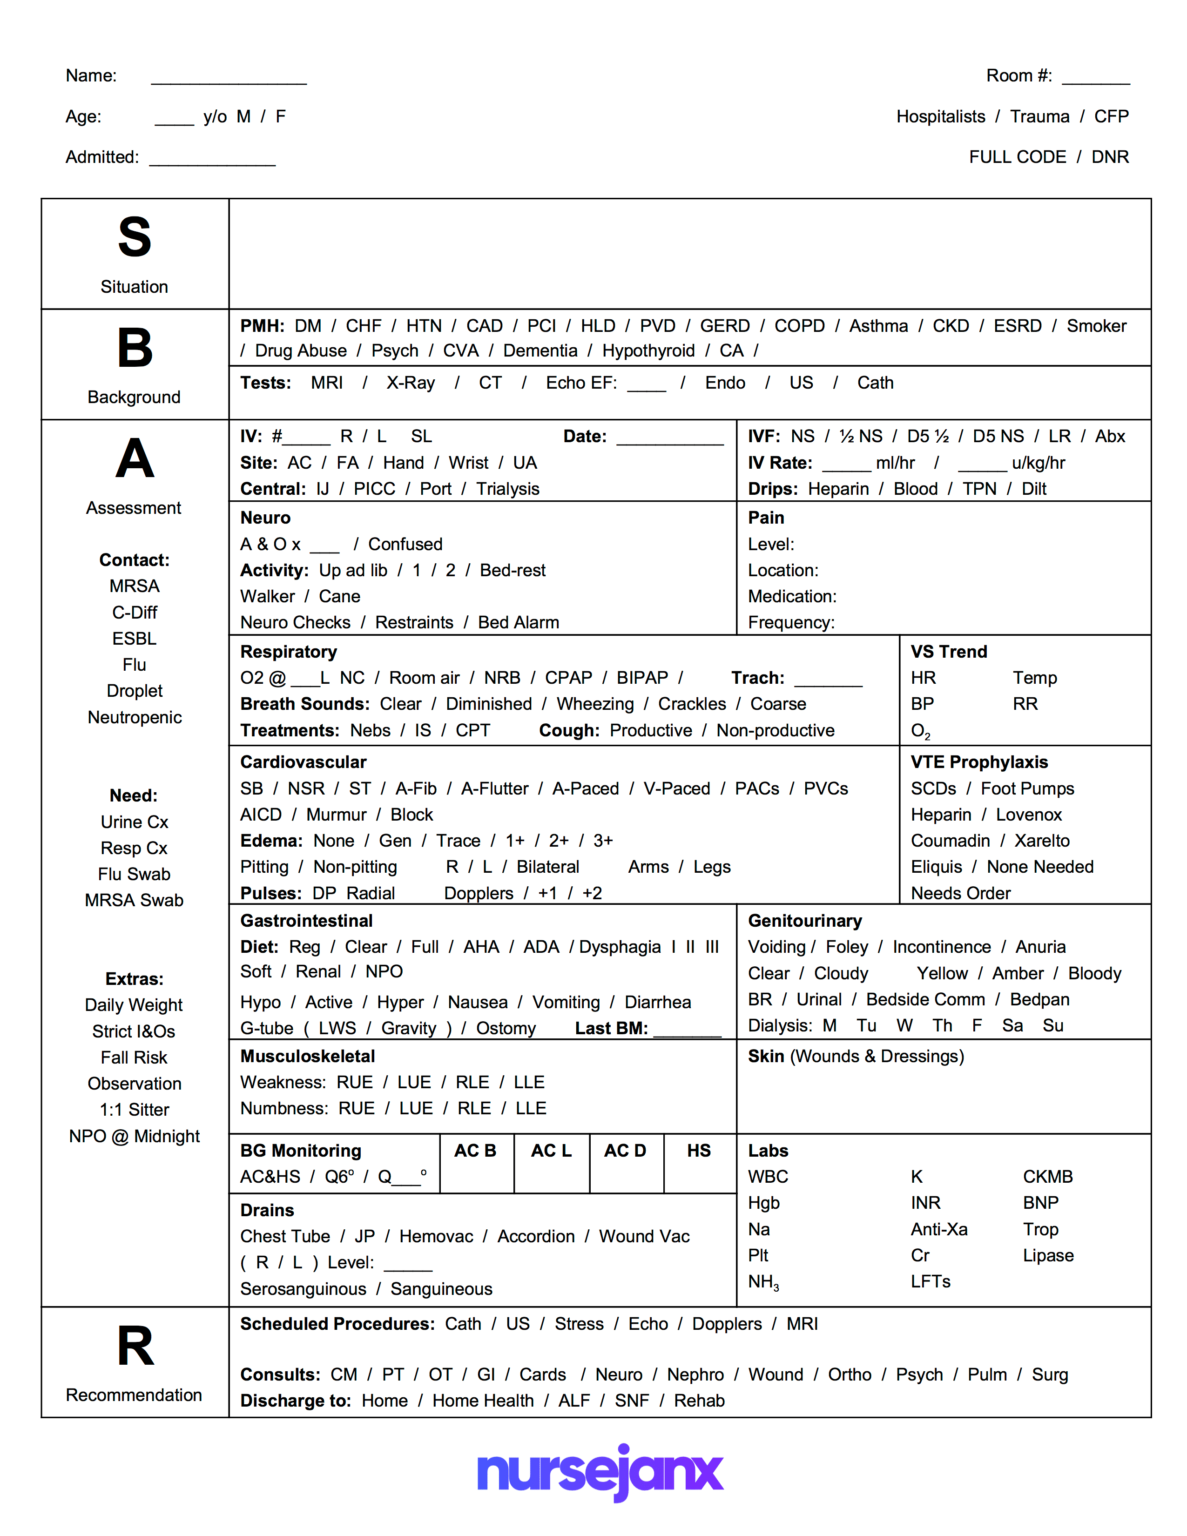 The Best Sbar & Brain Free Nursing Report Sheets & Templates intended